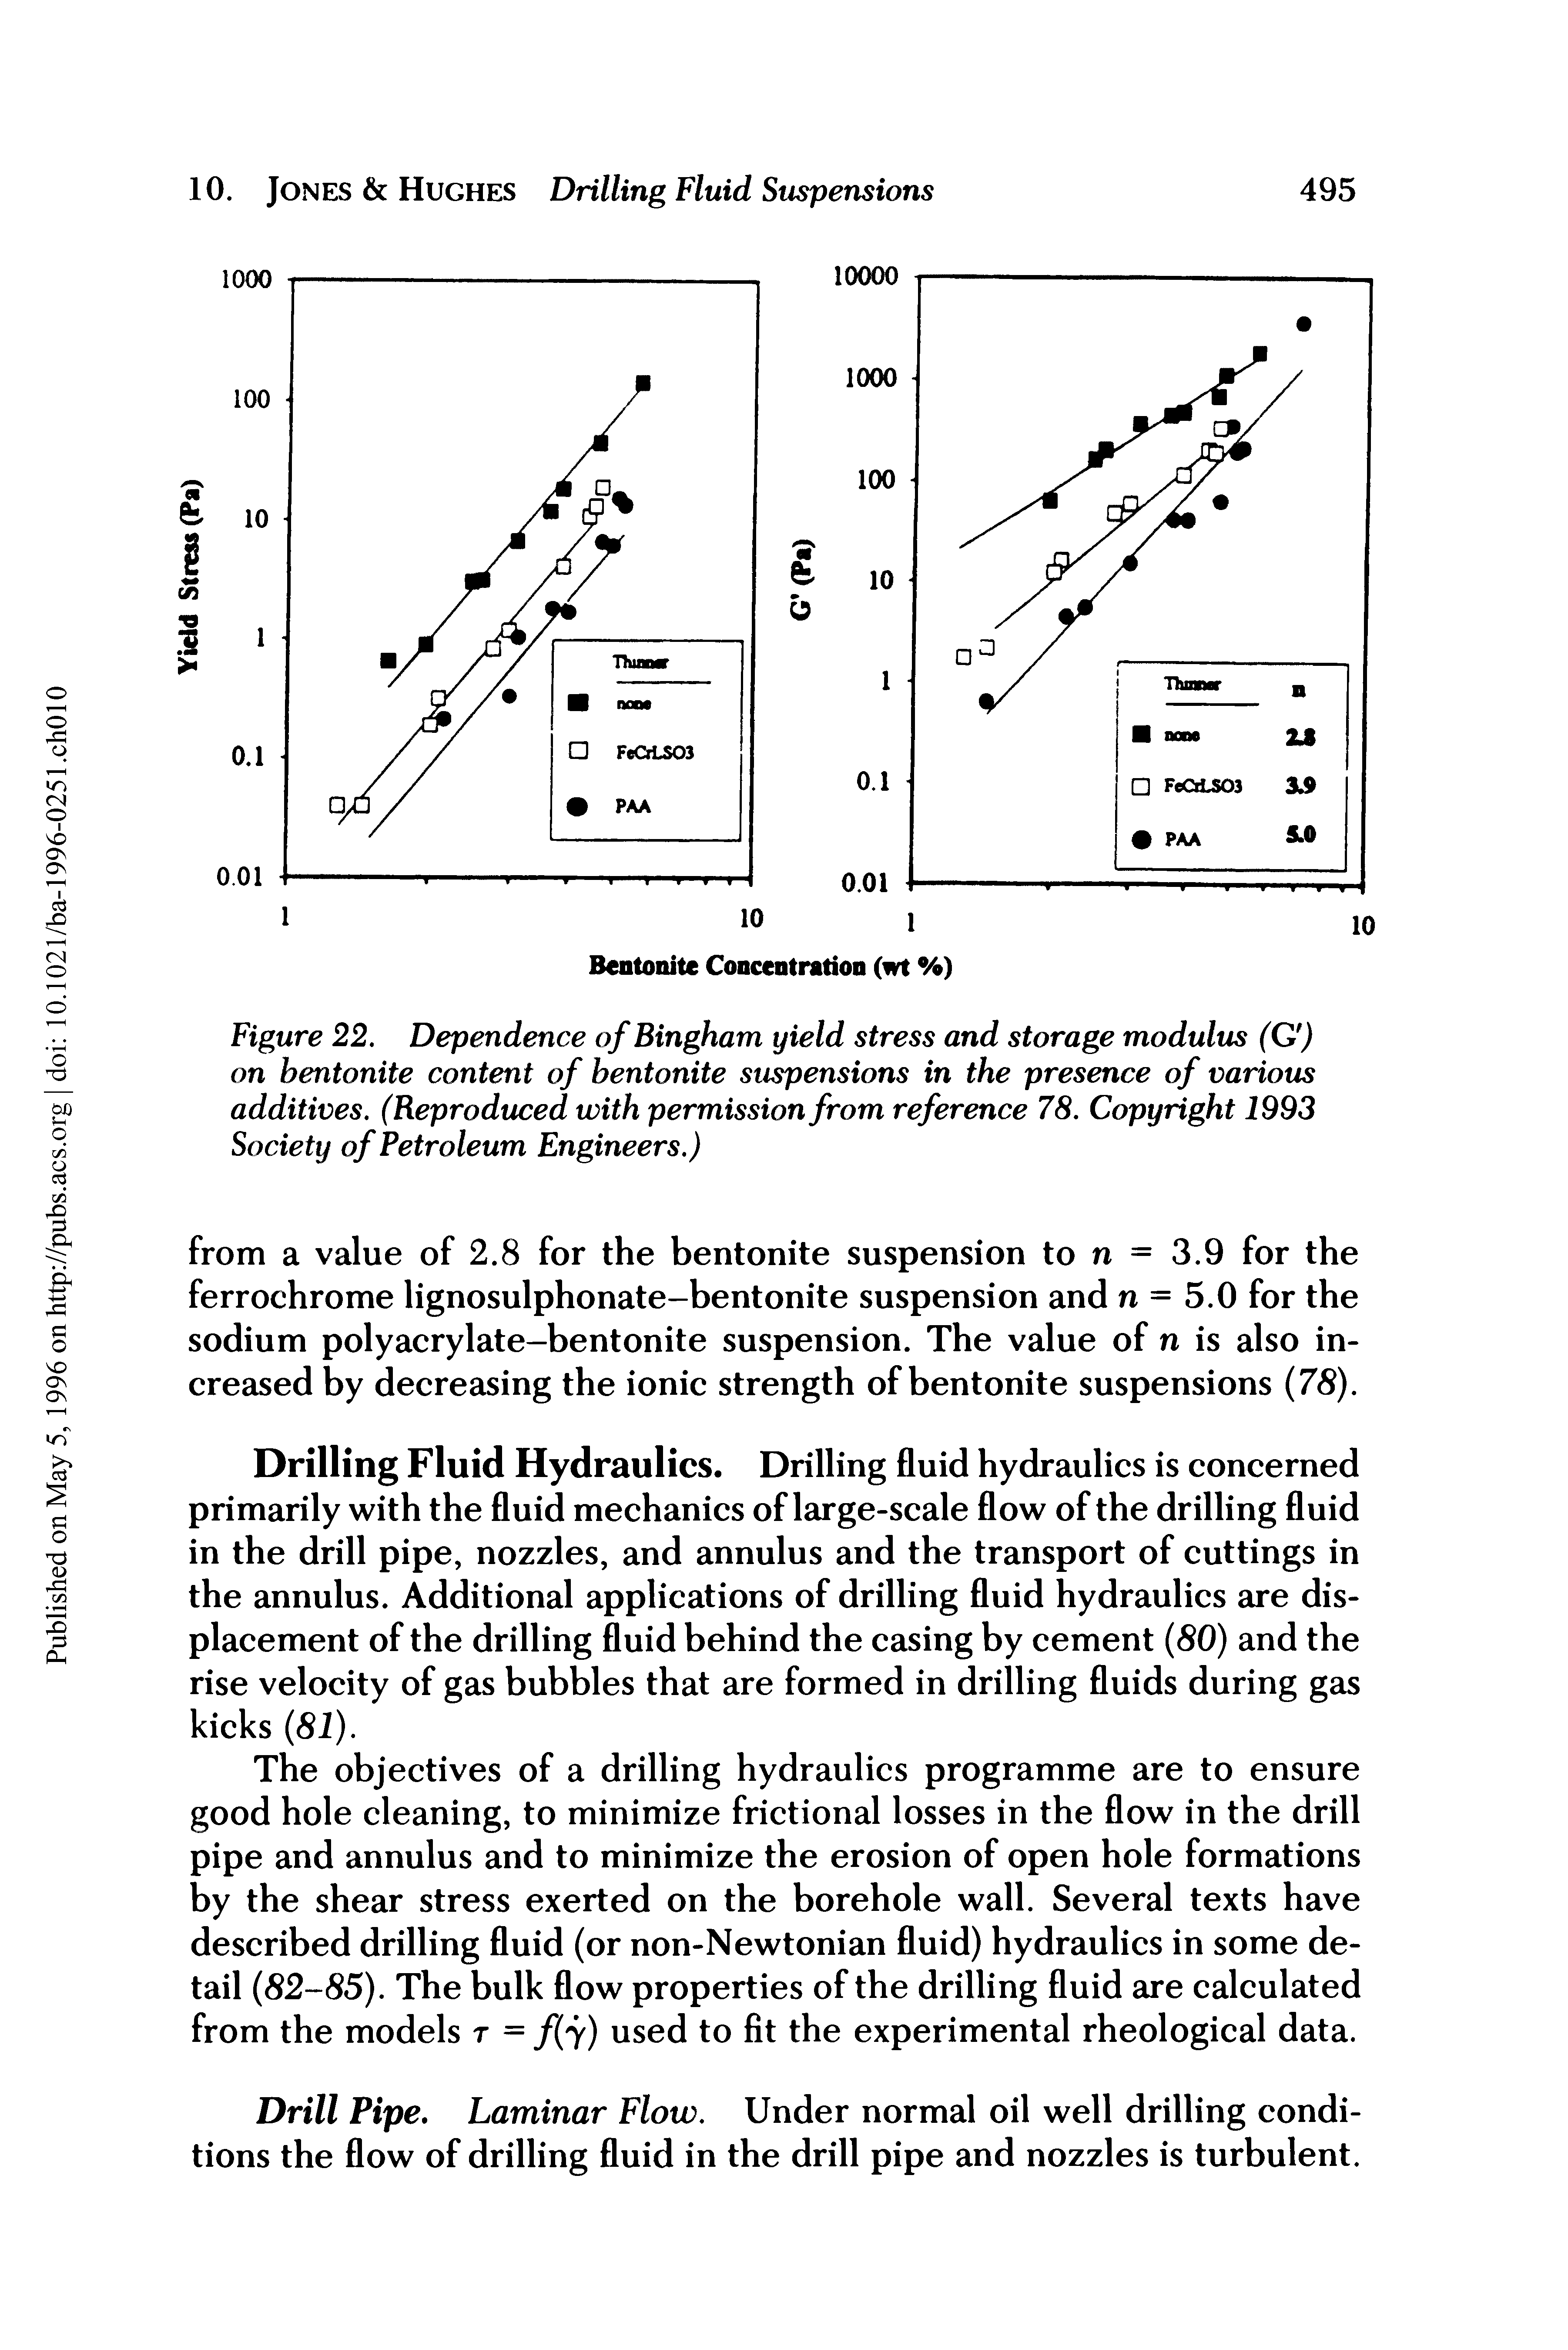 Figure 22. Dependence of Bingham yield stress and storage modulus (G ) on bentonite content of bentonite suspensions in the presence of various additives. (Reproduced with permission from reference 78. Copyright 1993 Society of Petroleum Engineers.)...